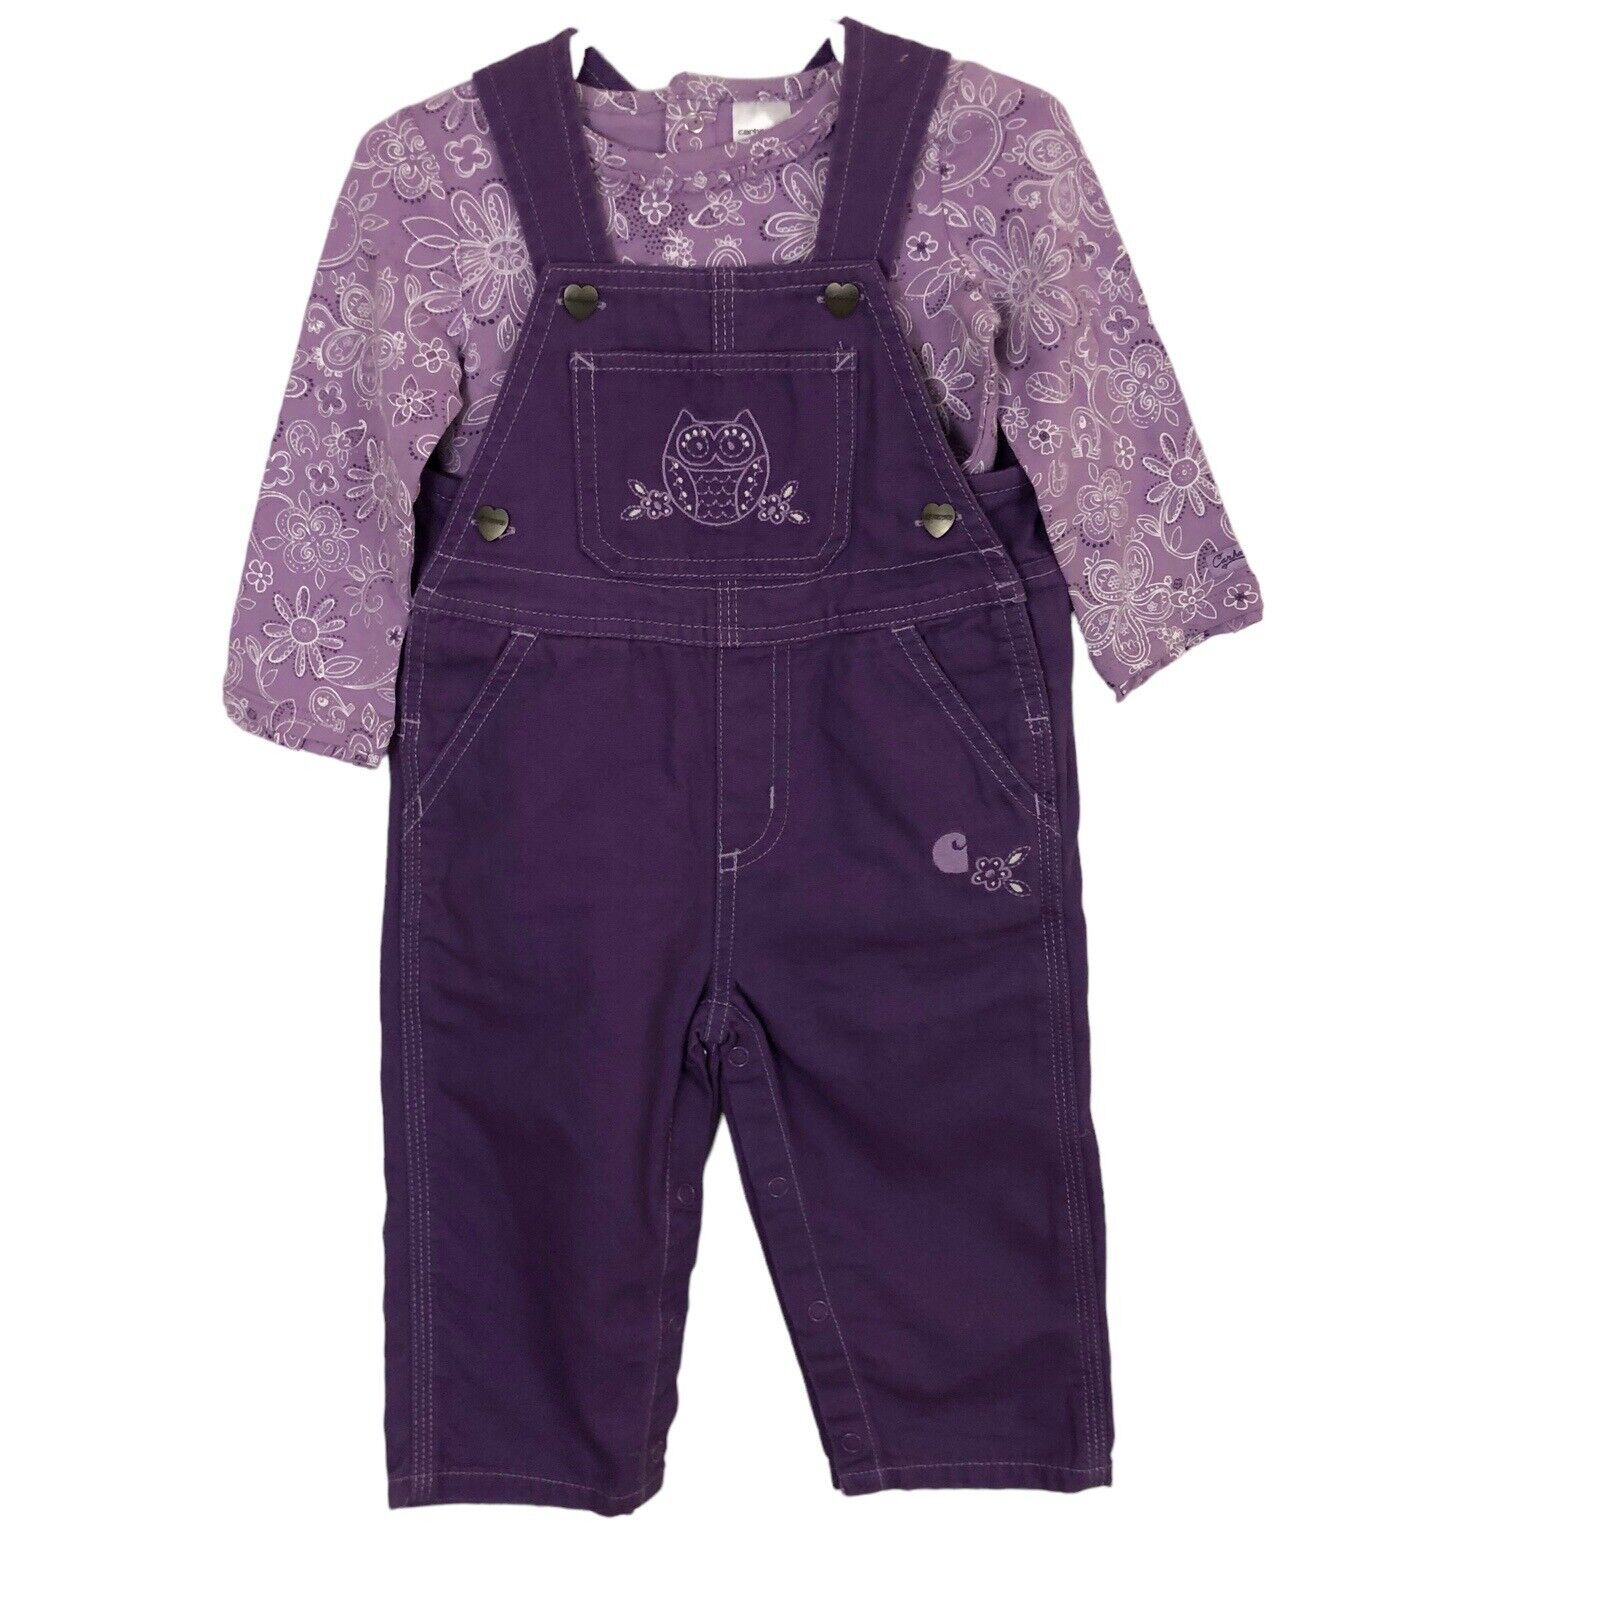 Picture 1 of 14 Hover to zoom CARHARTT Baby Girl 2 PC Overalls Bodysuit Purple 12 M New Owl Patrician